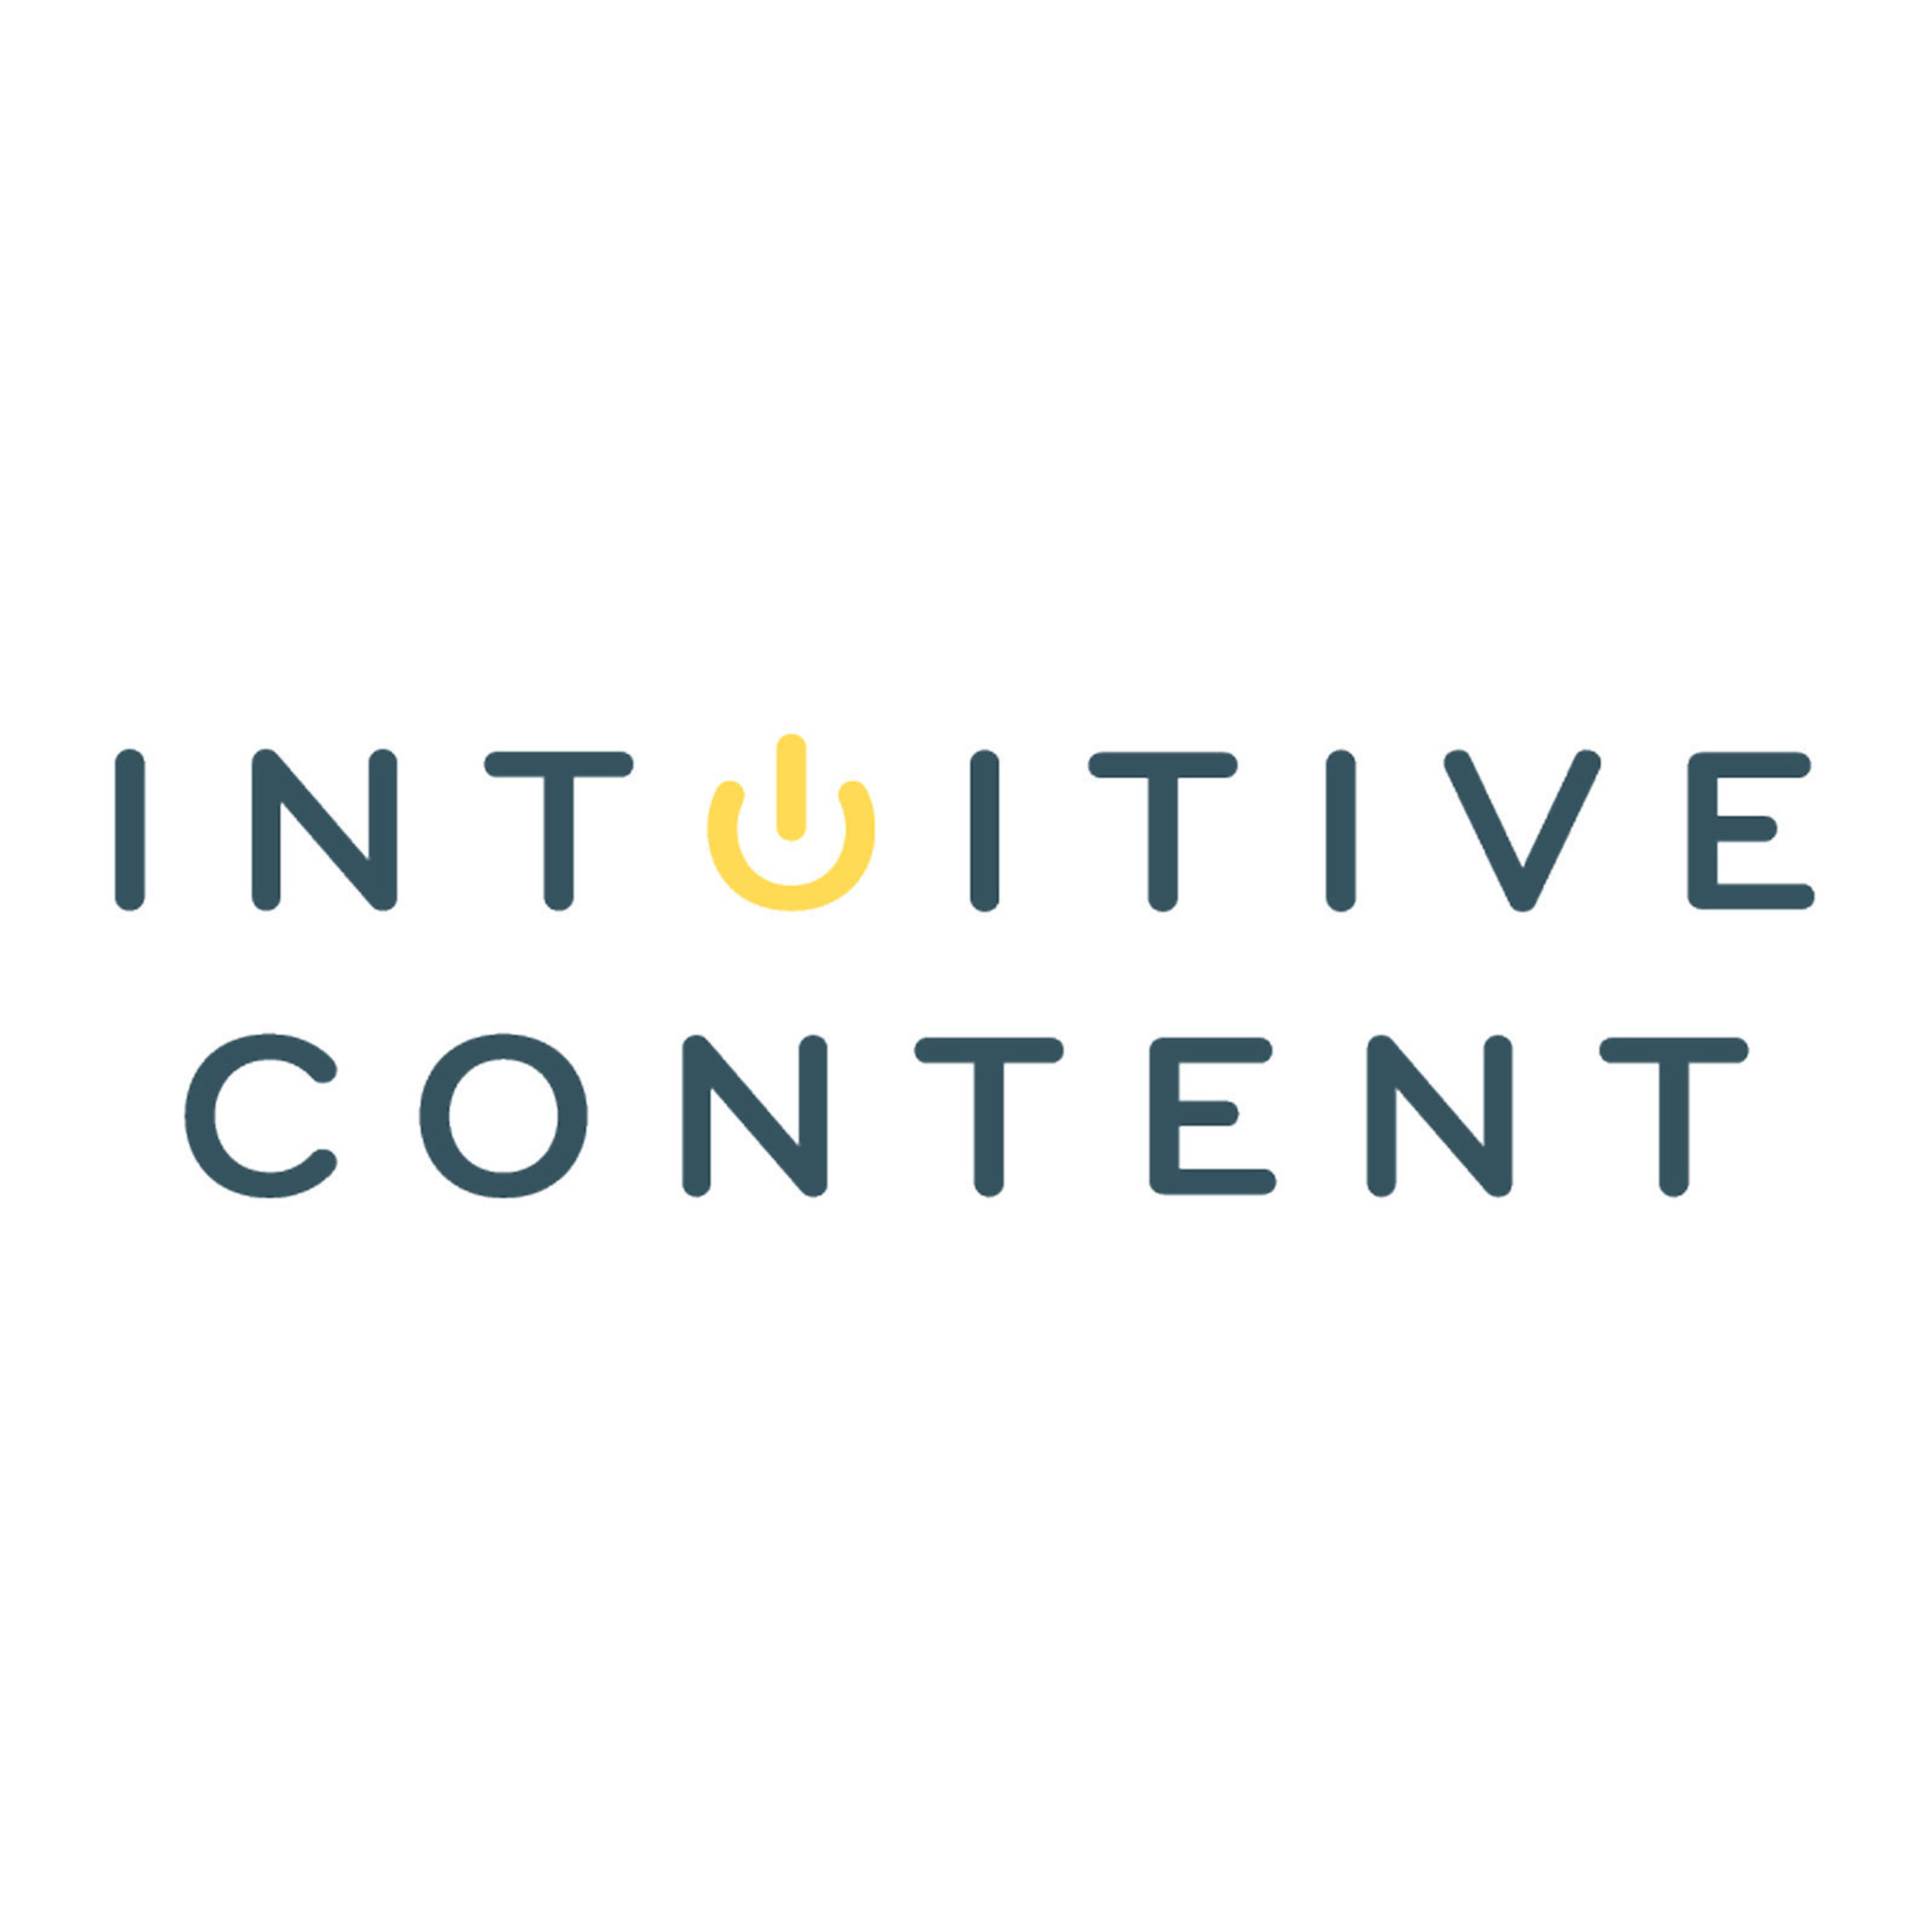 Intuitive Content Logo.